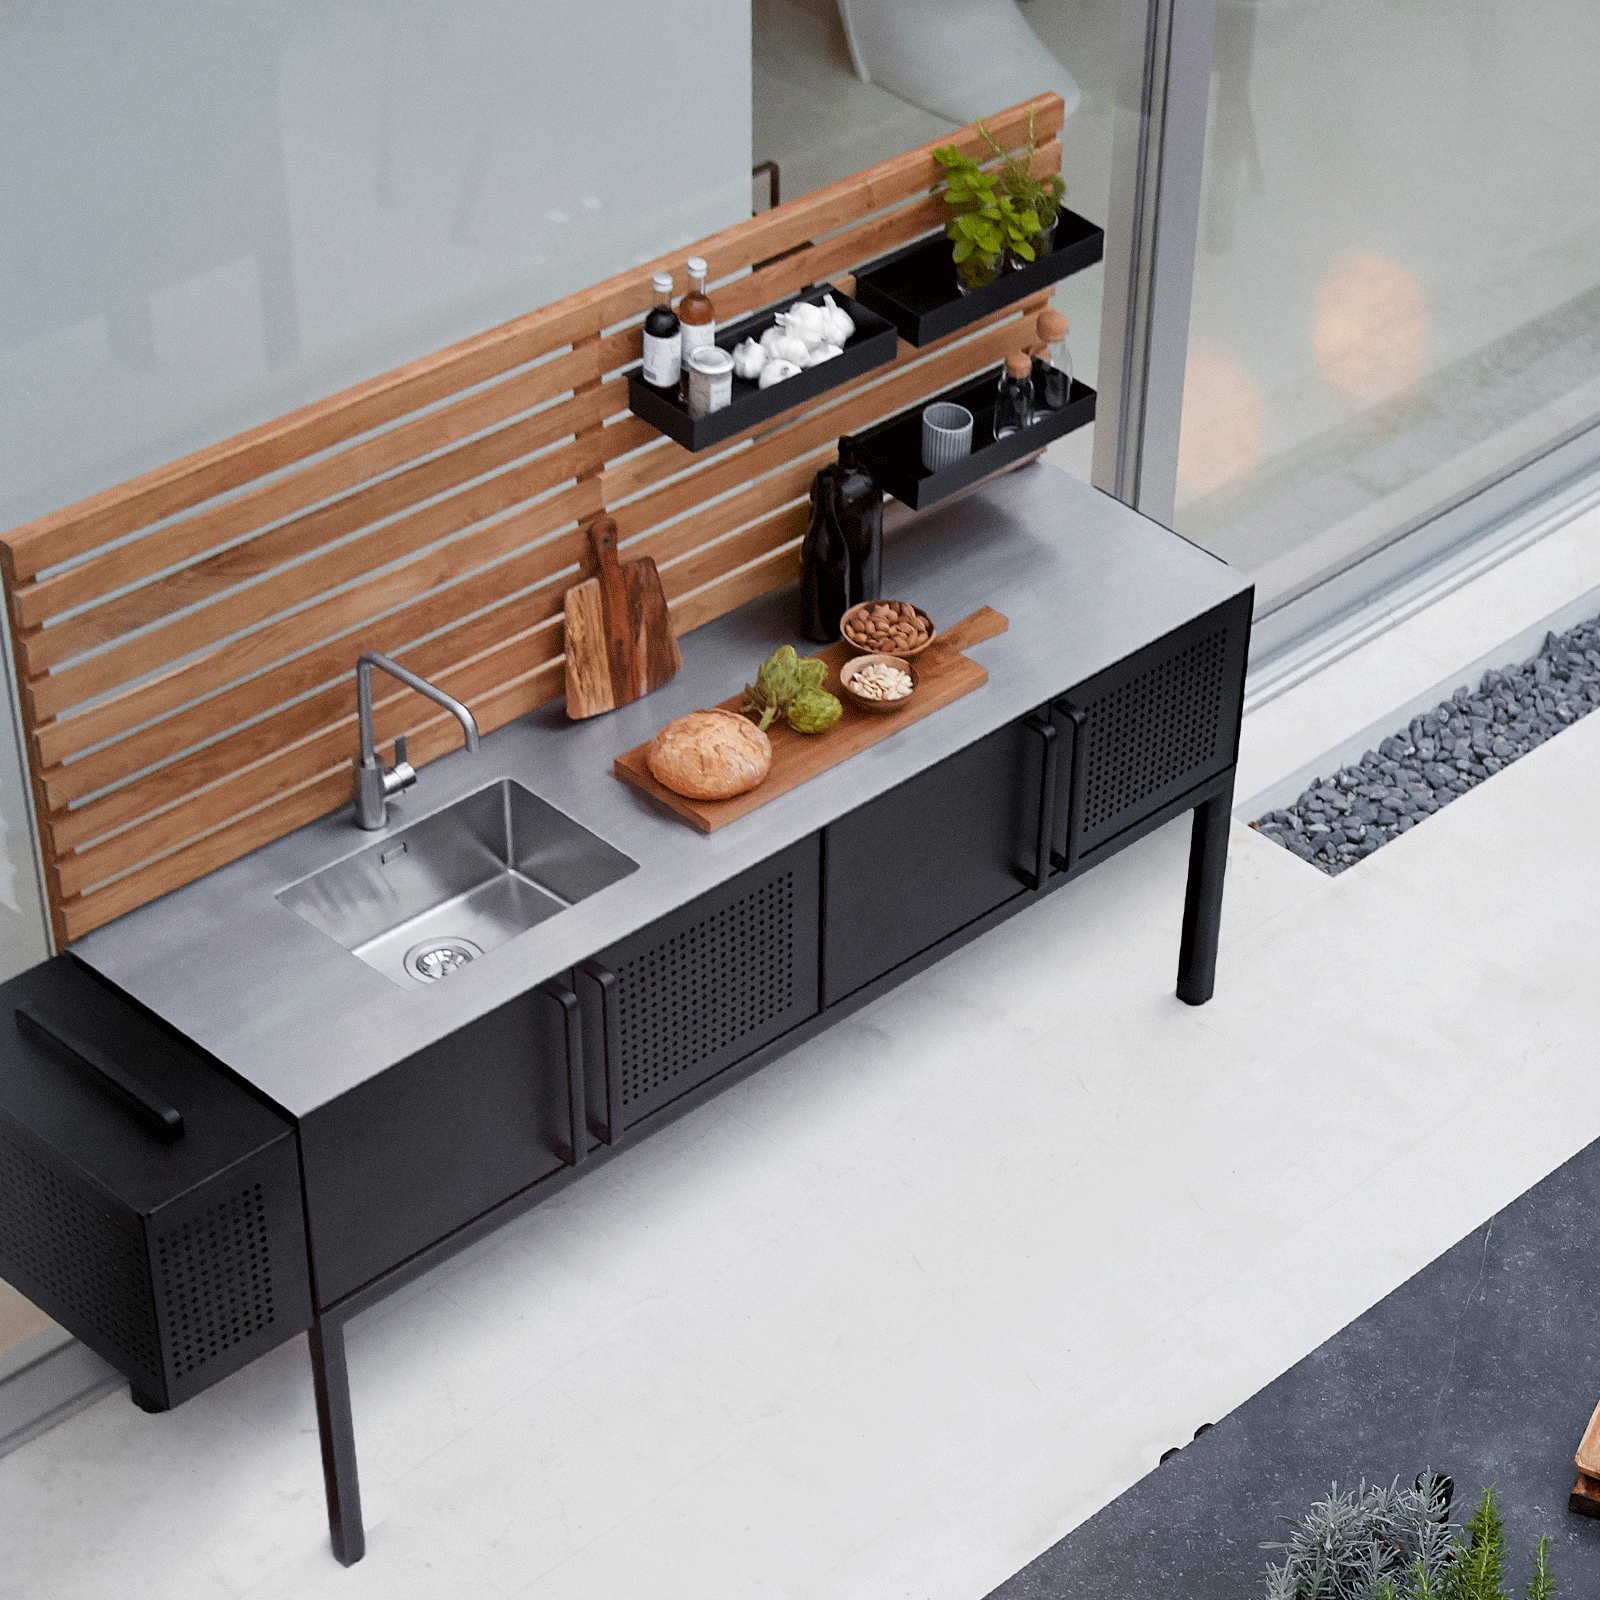 EXPO Cane-line DROP outdoor kitchen